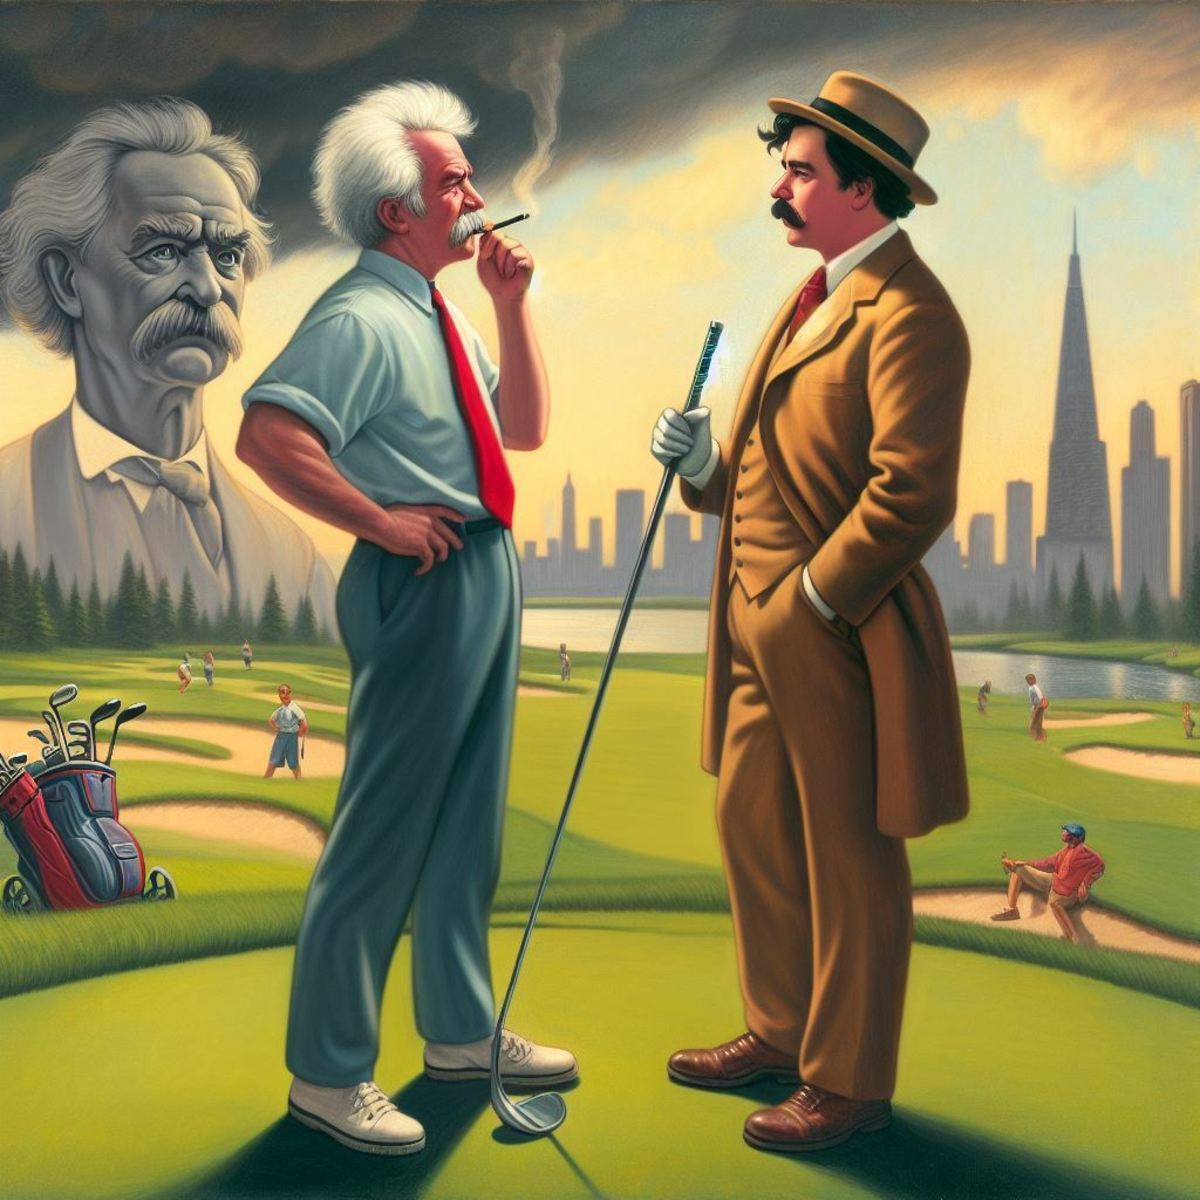 Wandering Aimlessly: An Alternative Perspective on Golf and Golfing